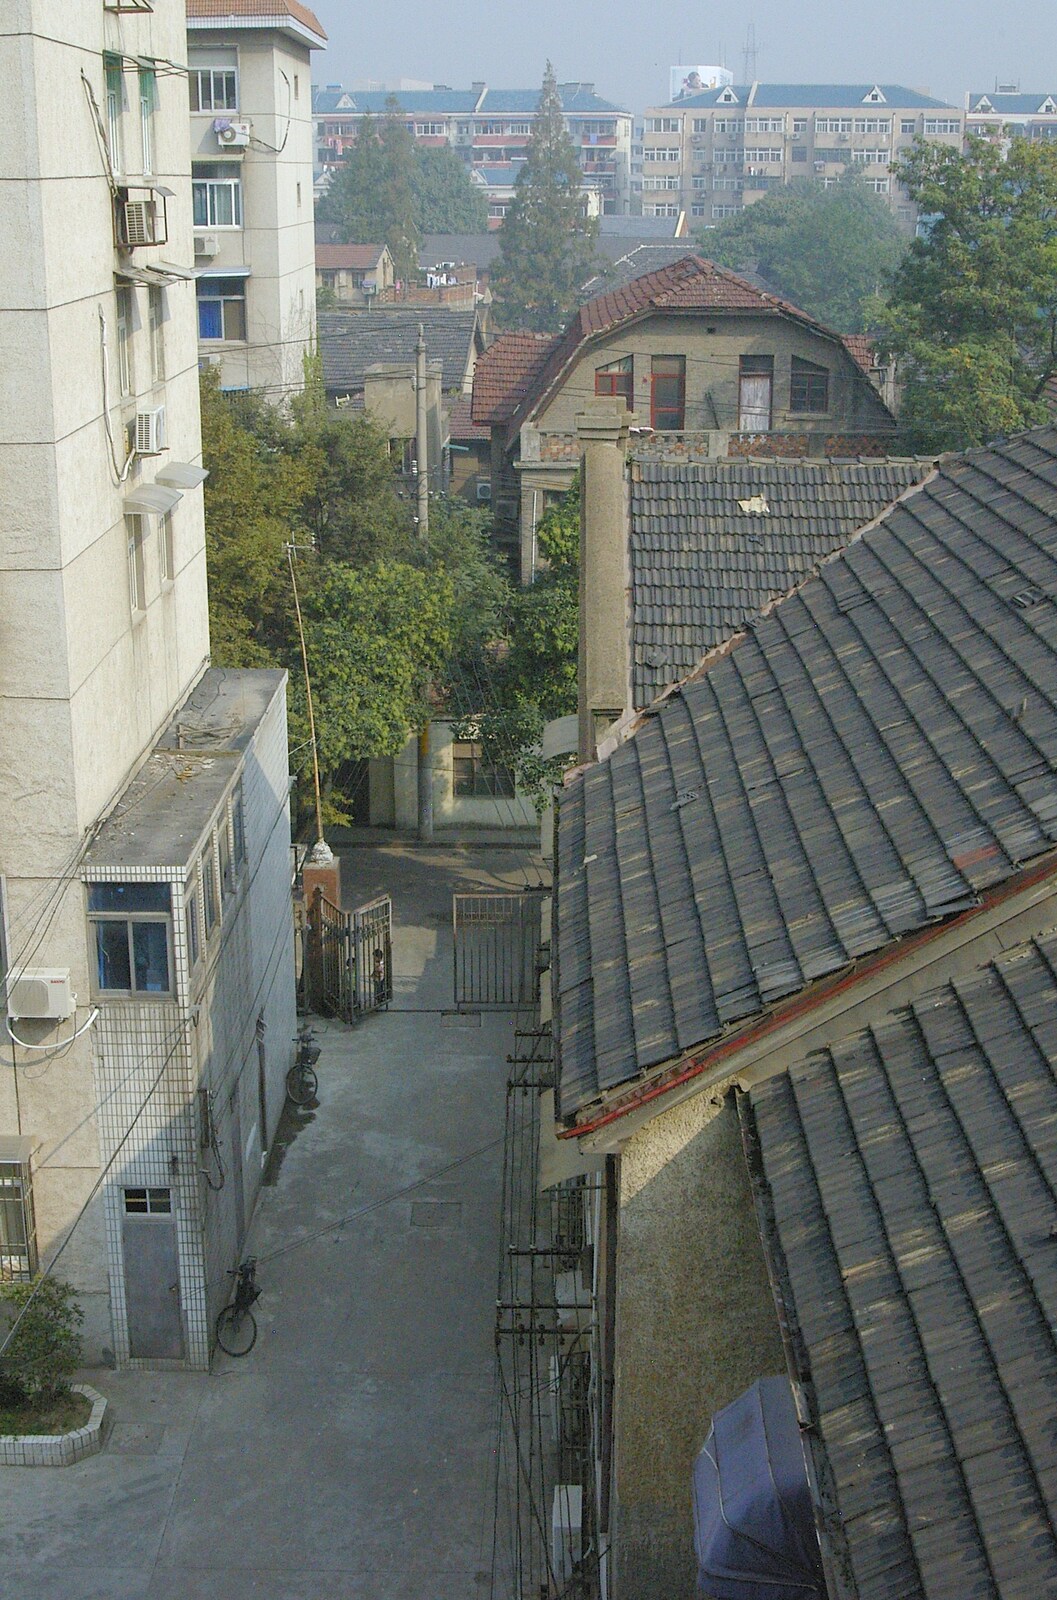 The alley behind the office from A Few Days in Nanjing, Jiangsu Province, China - 7th October 2006